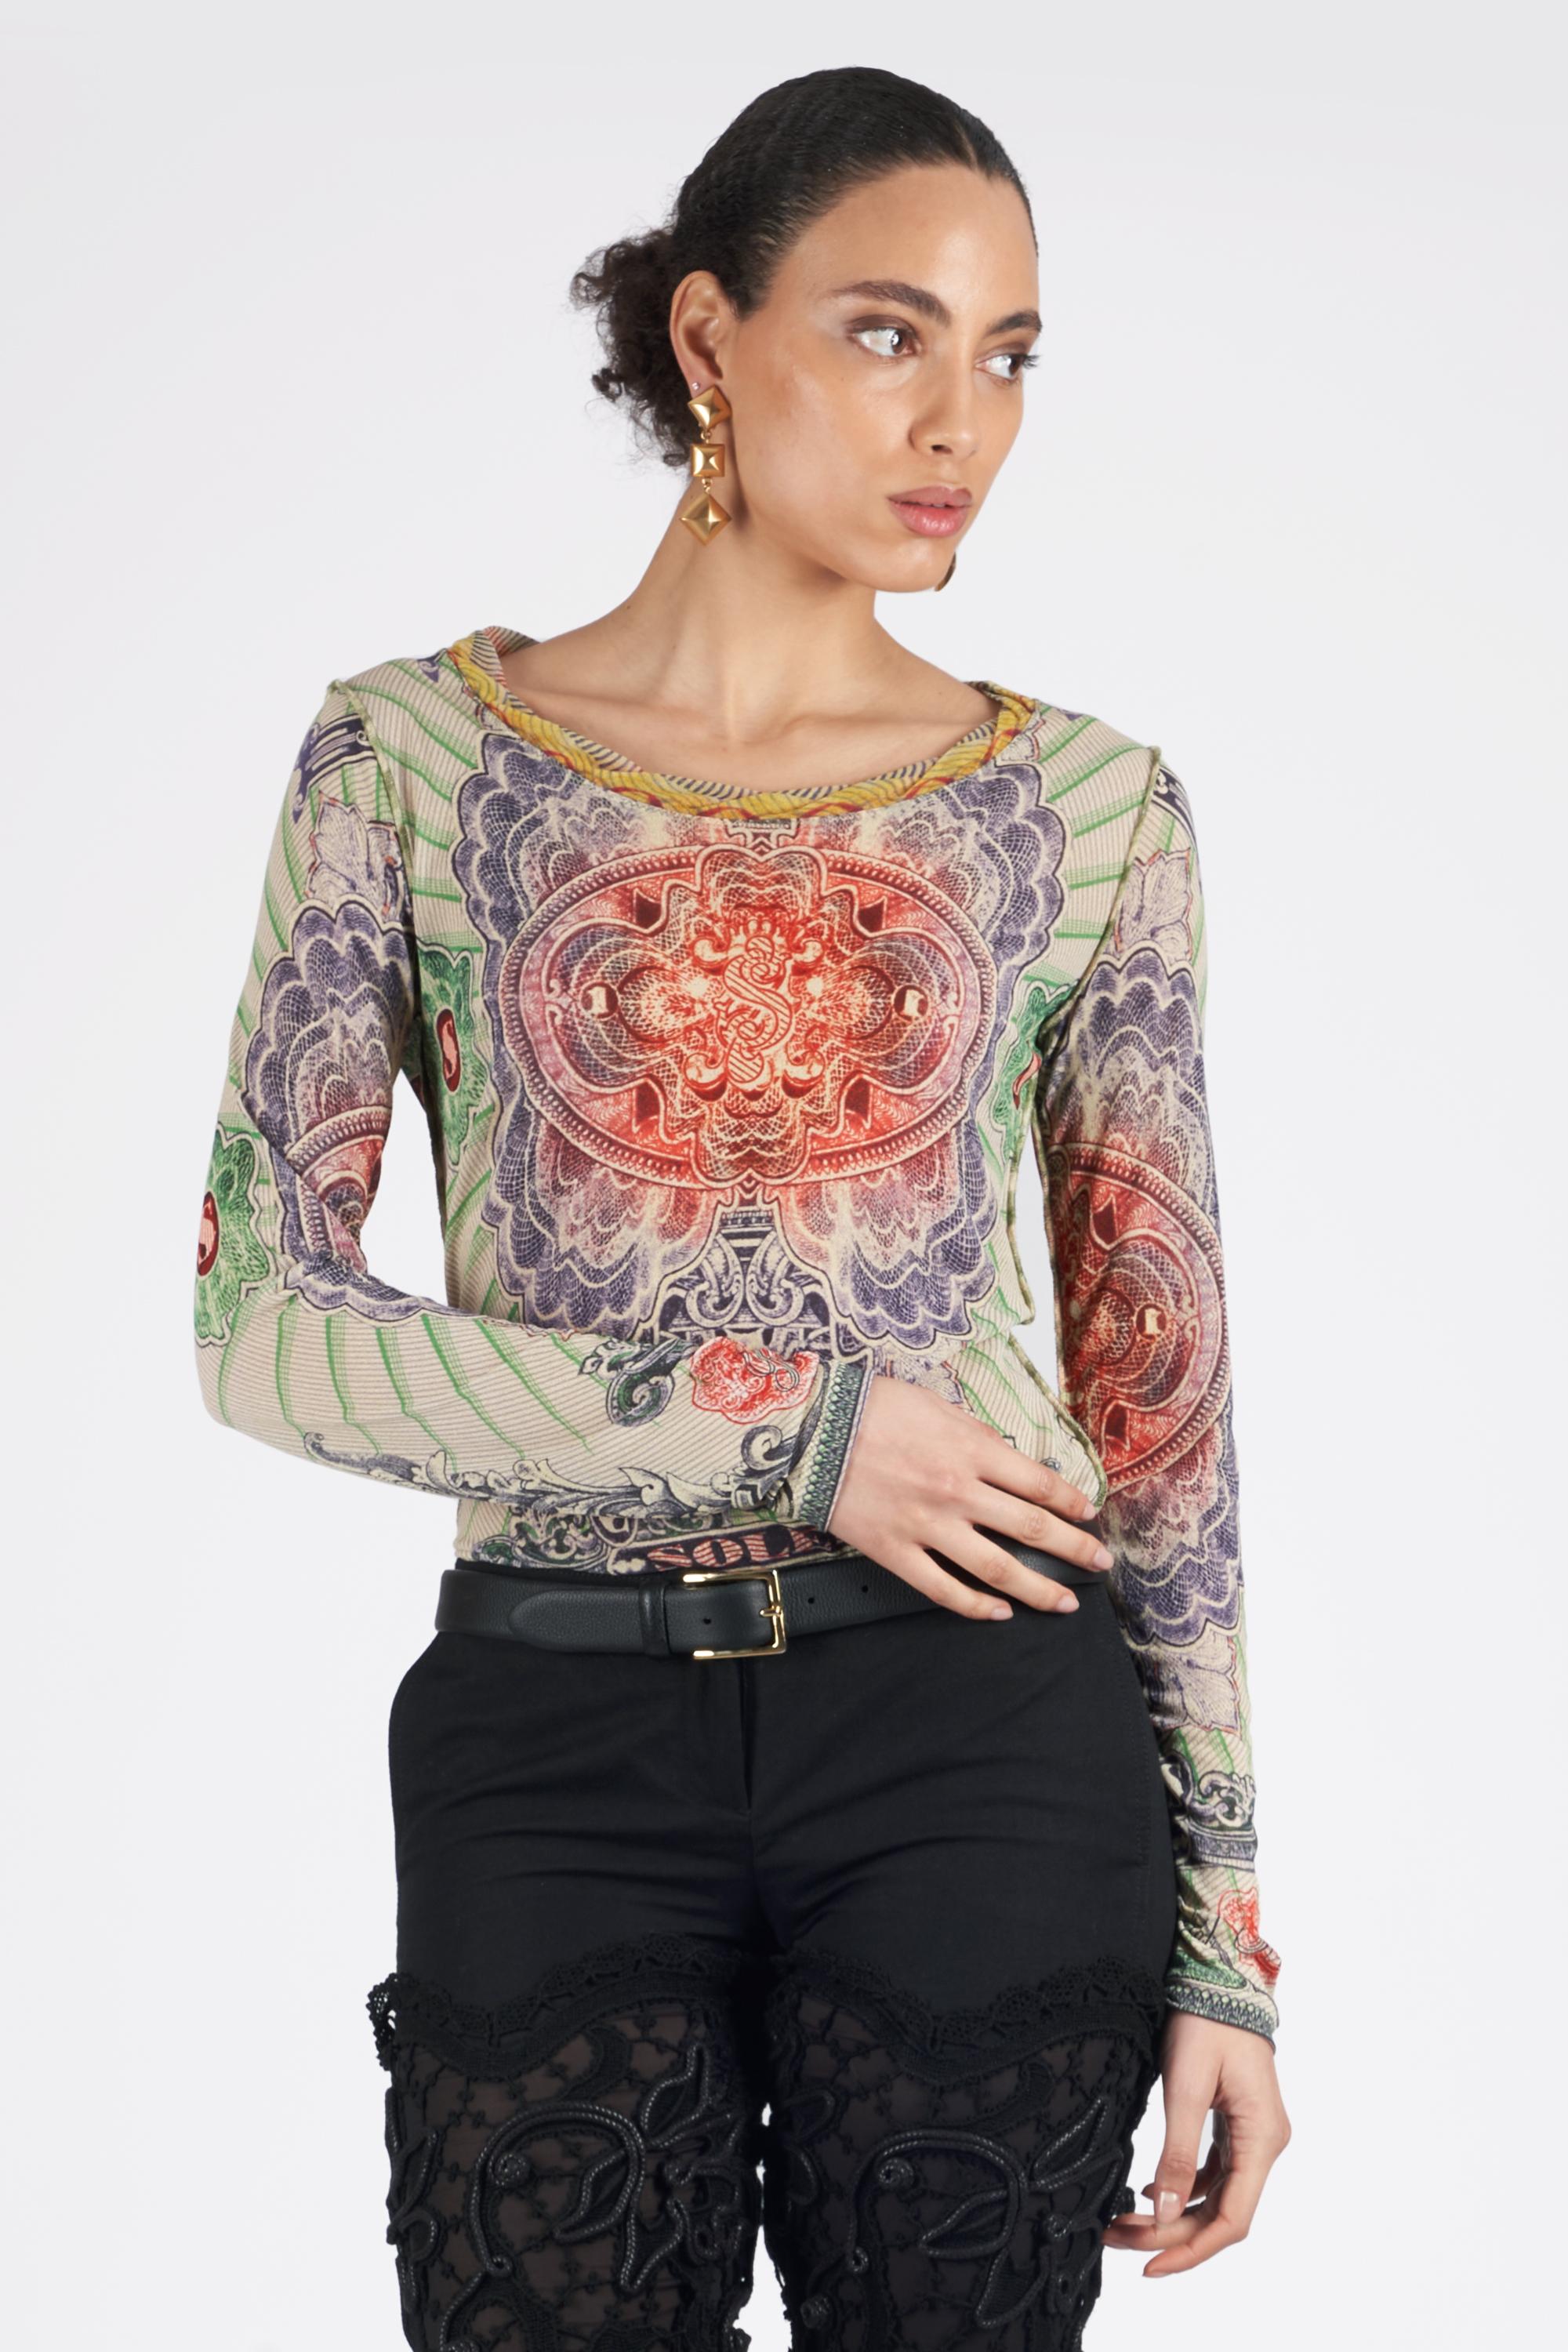 Women's Vintage S/S 1994 Banknote Mesh Top For Sale